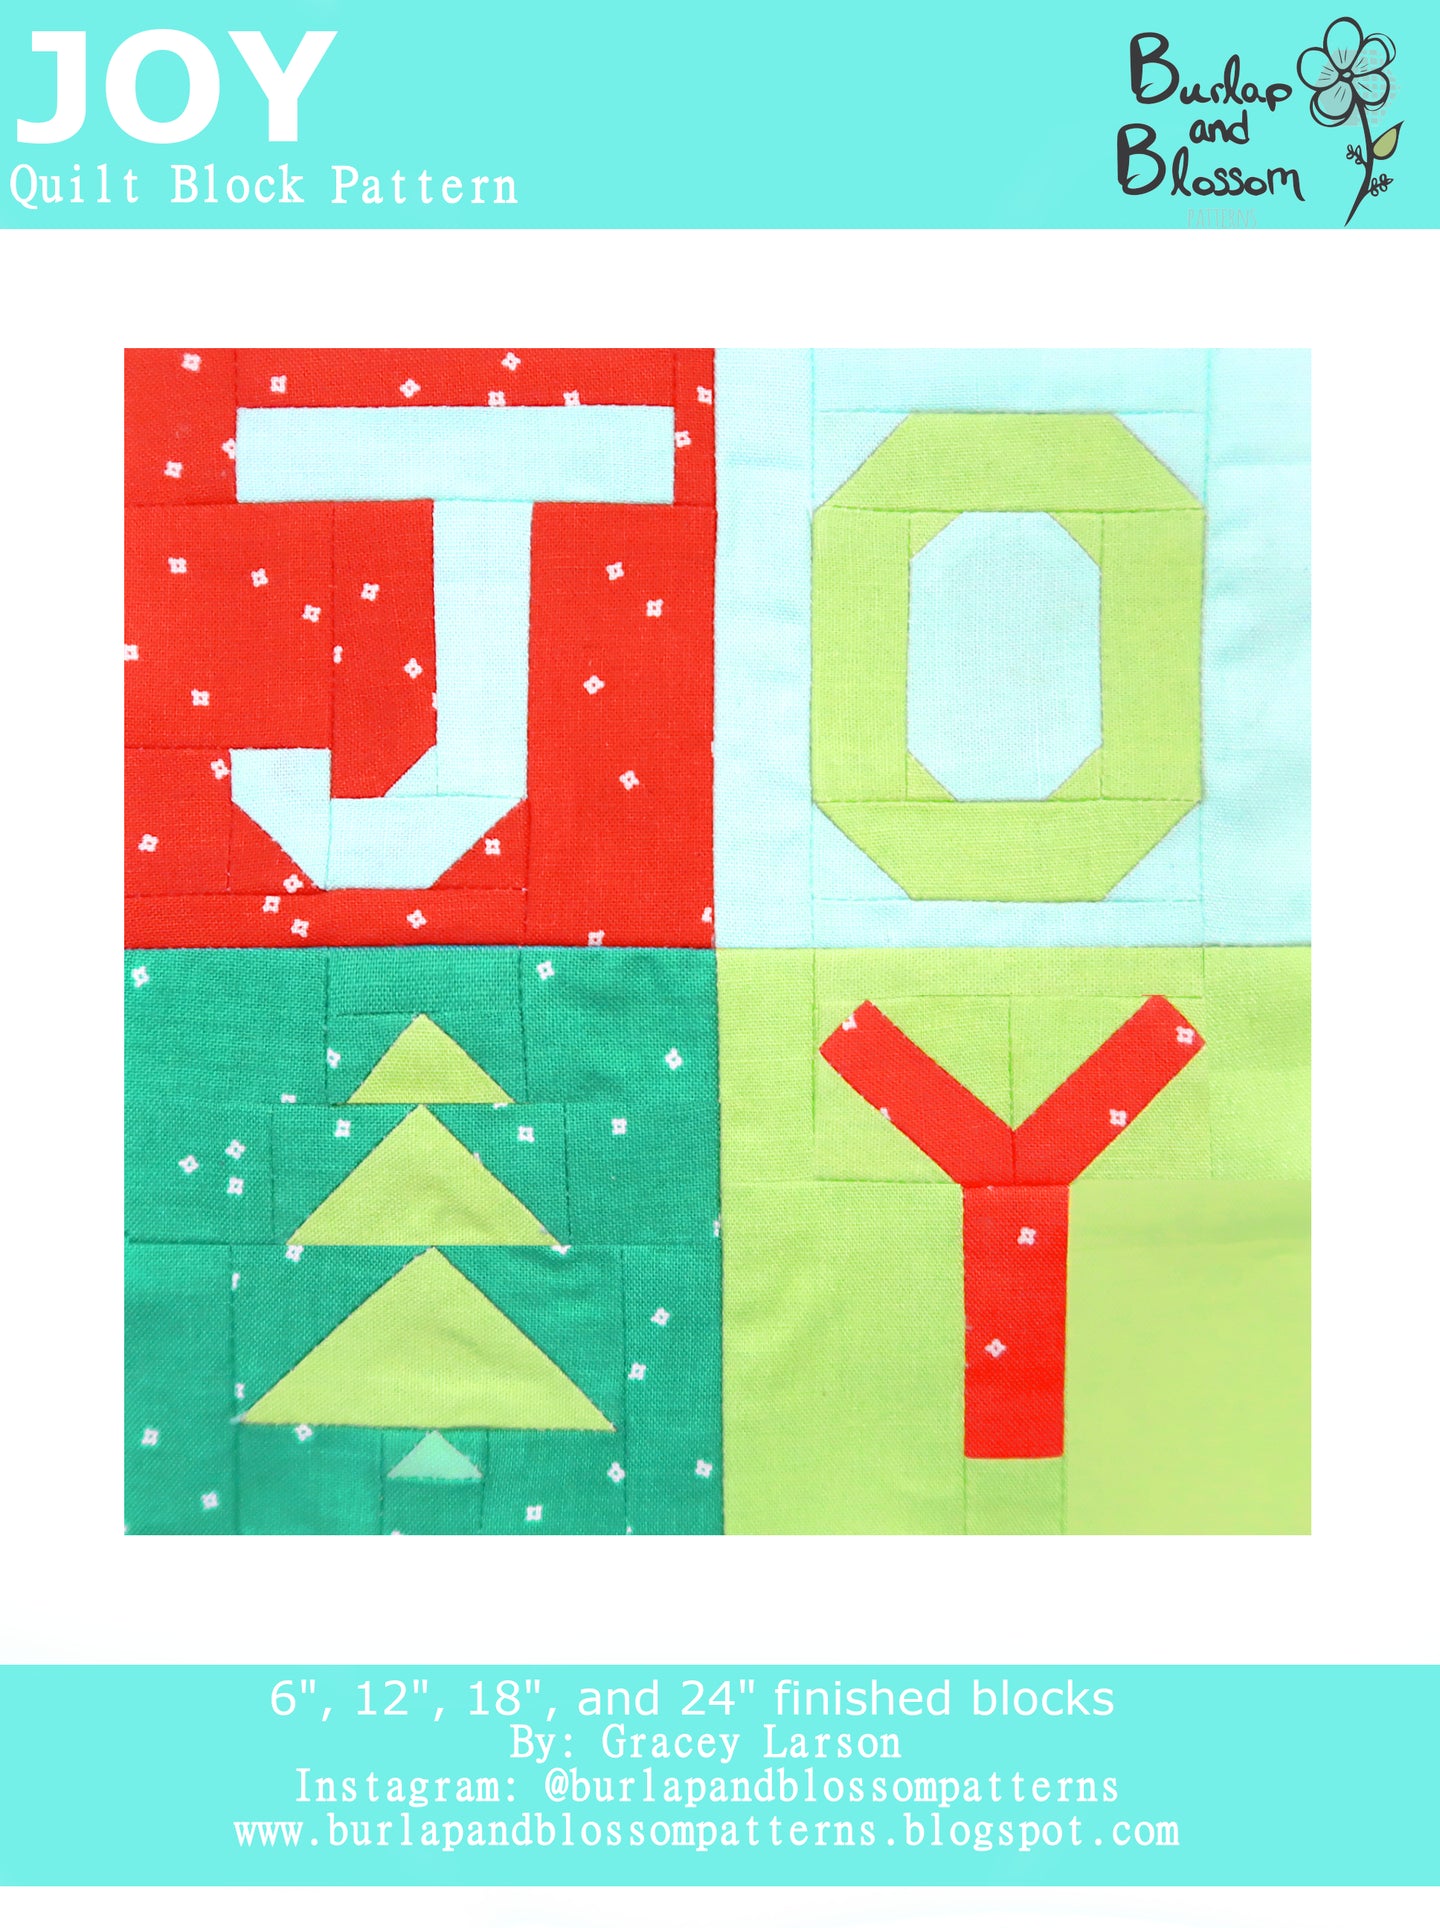 Pattern, Joy Quilt Block by Burlap and Blossom (digital download)